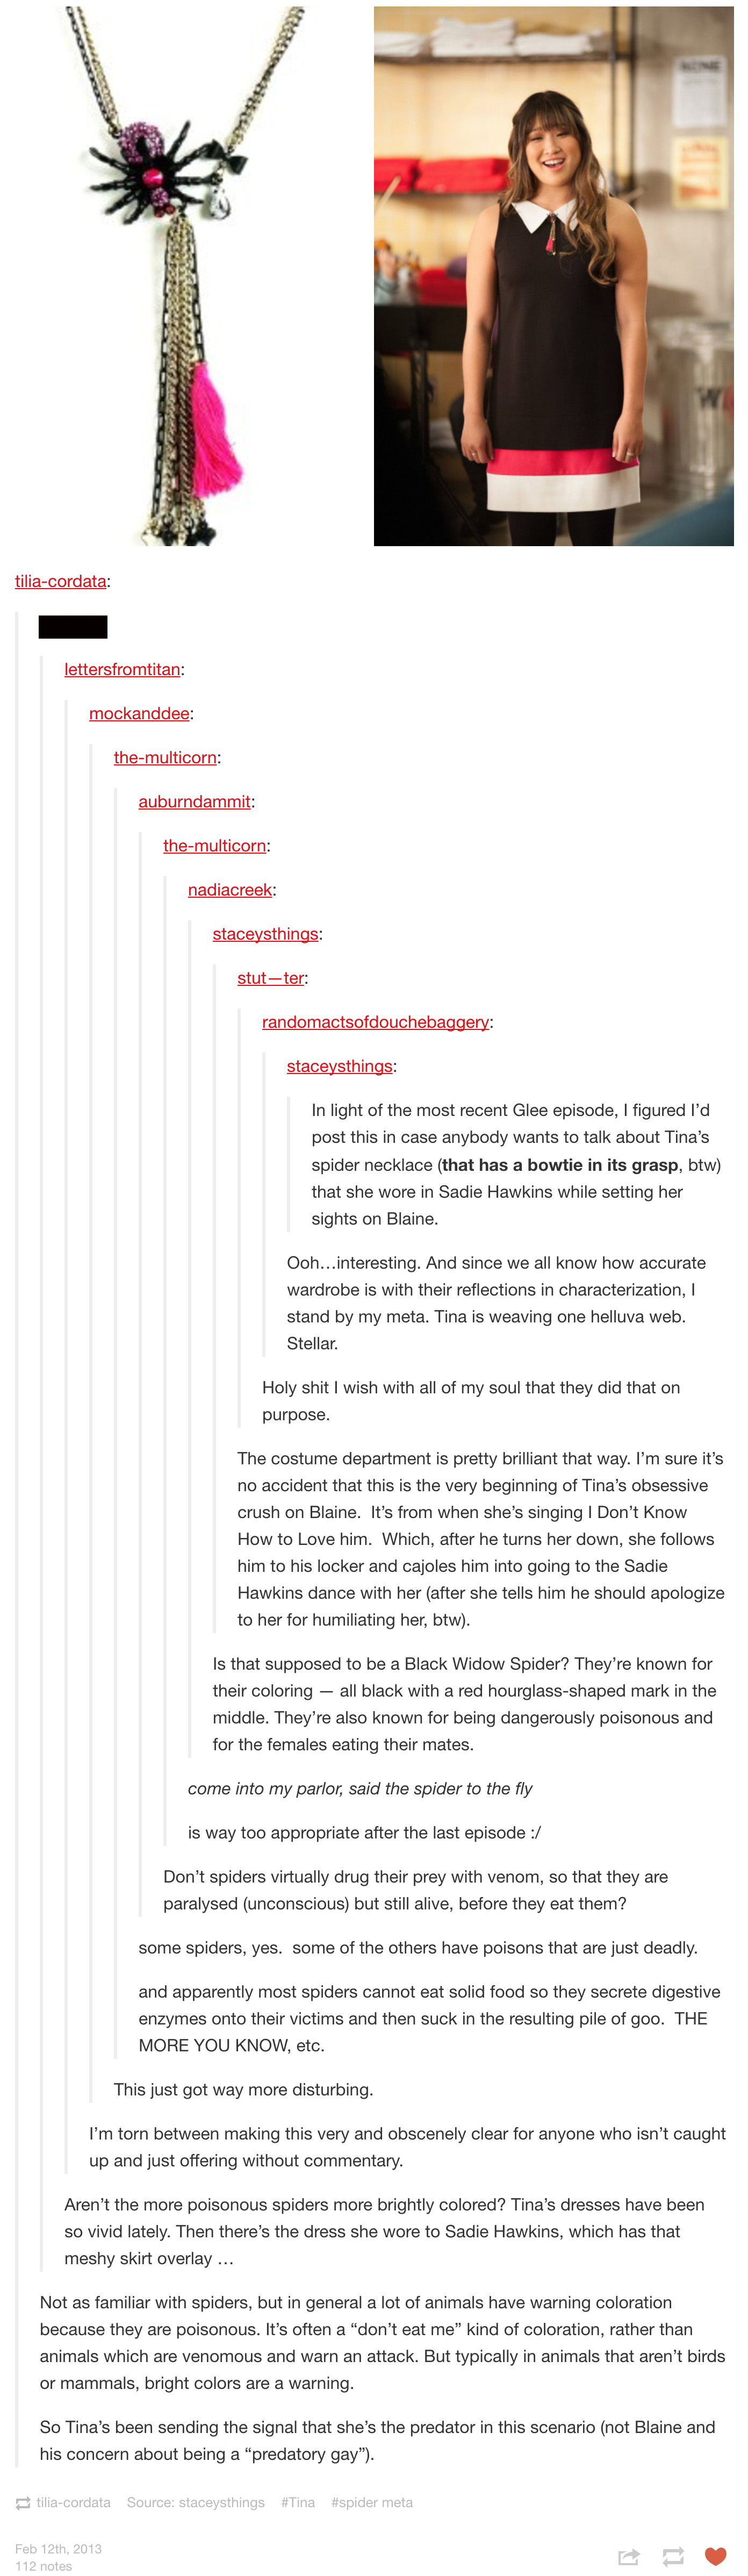 Tumblr screenshot. Two images side by side of a necklace featuring a spider grasping a bow tie, and the character of Tina Cohen-Chang wearing the same necklace as she sings I Don't Know How to Love Him to Blaine in the episode Sadie Hawkins. The images are followed by a long text conversation among Tumblr users about the symbolism and nature of spiders as web-weavers and predators, and how the spider costuming further telegraphs Tina's pursuit of Blaine.